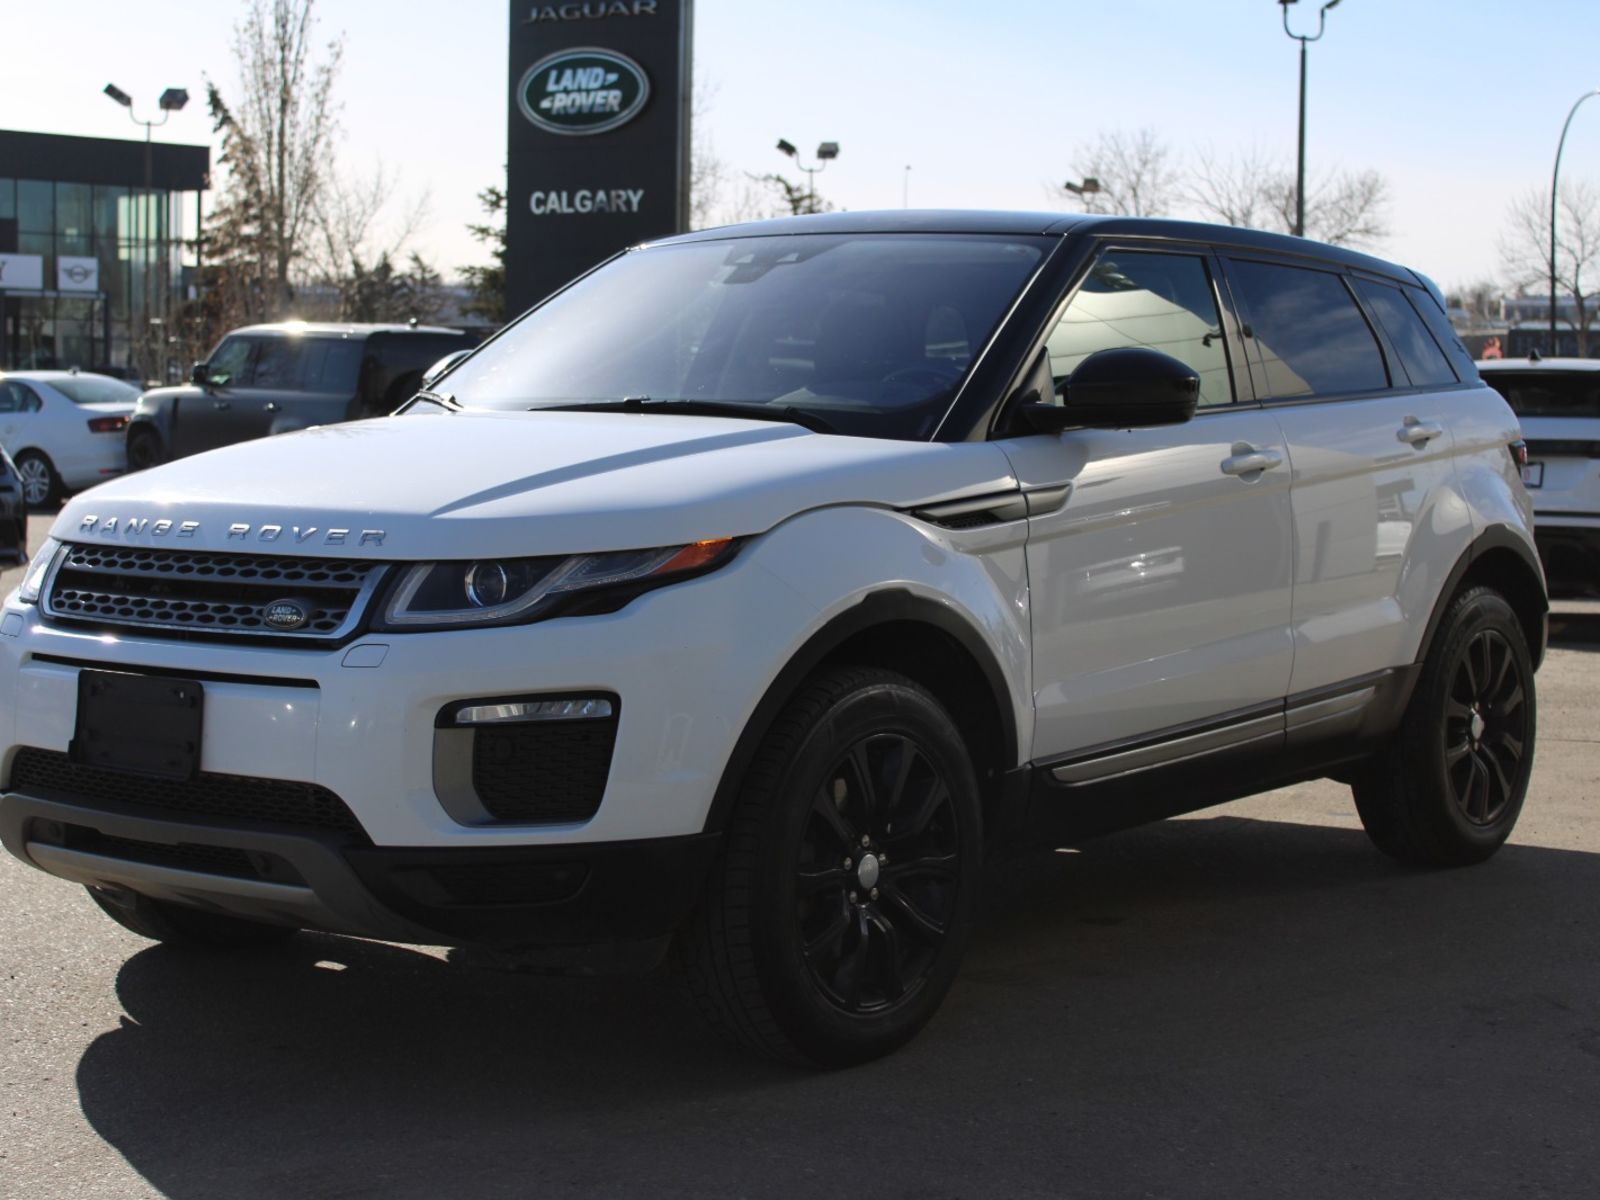 2016 Land Rover Range Rover Evoque NEW BRAKES, TIMING CHAINS, TIRES AND FULL SERVICE!